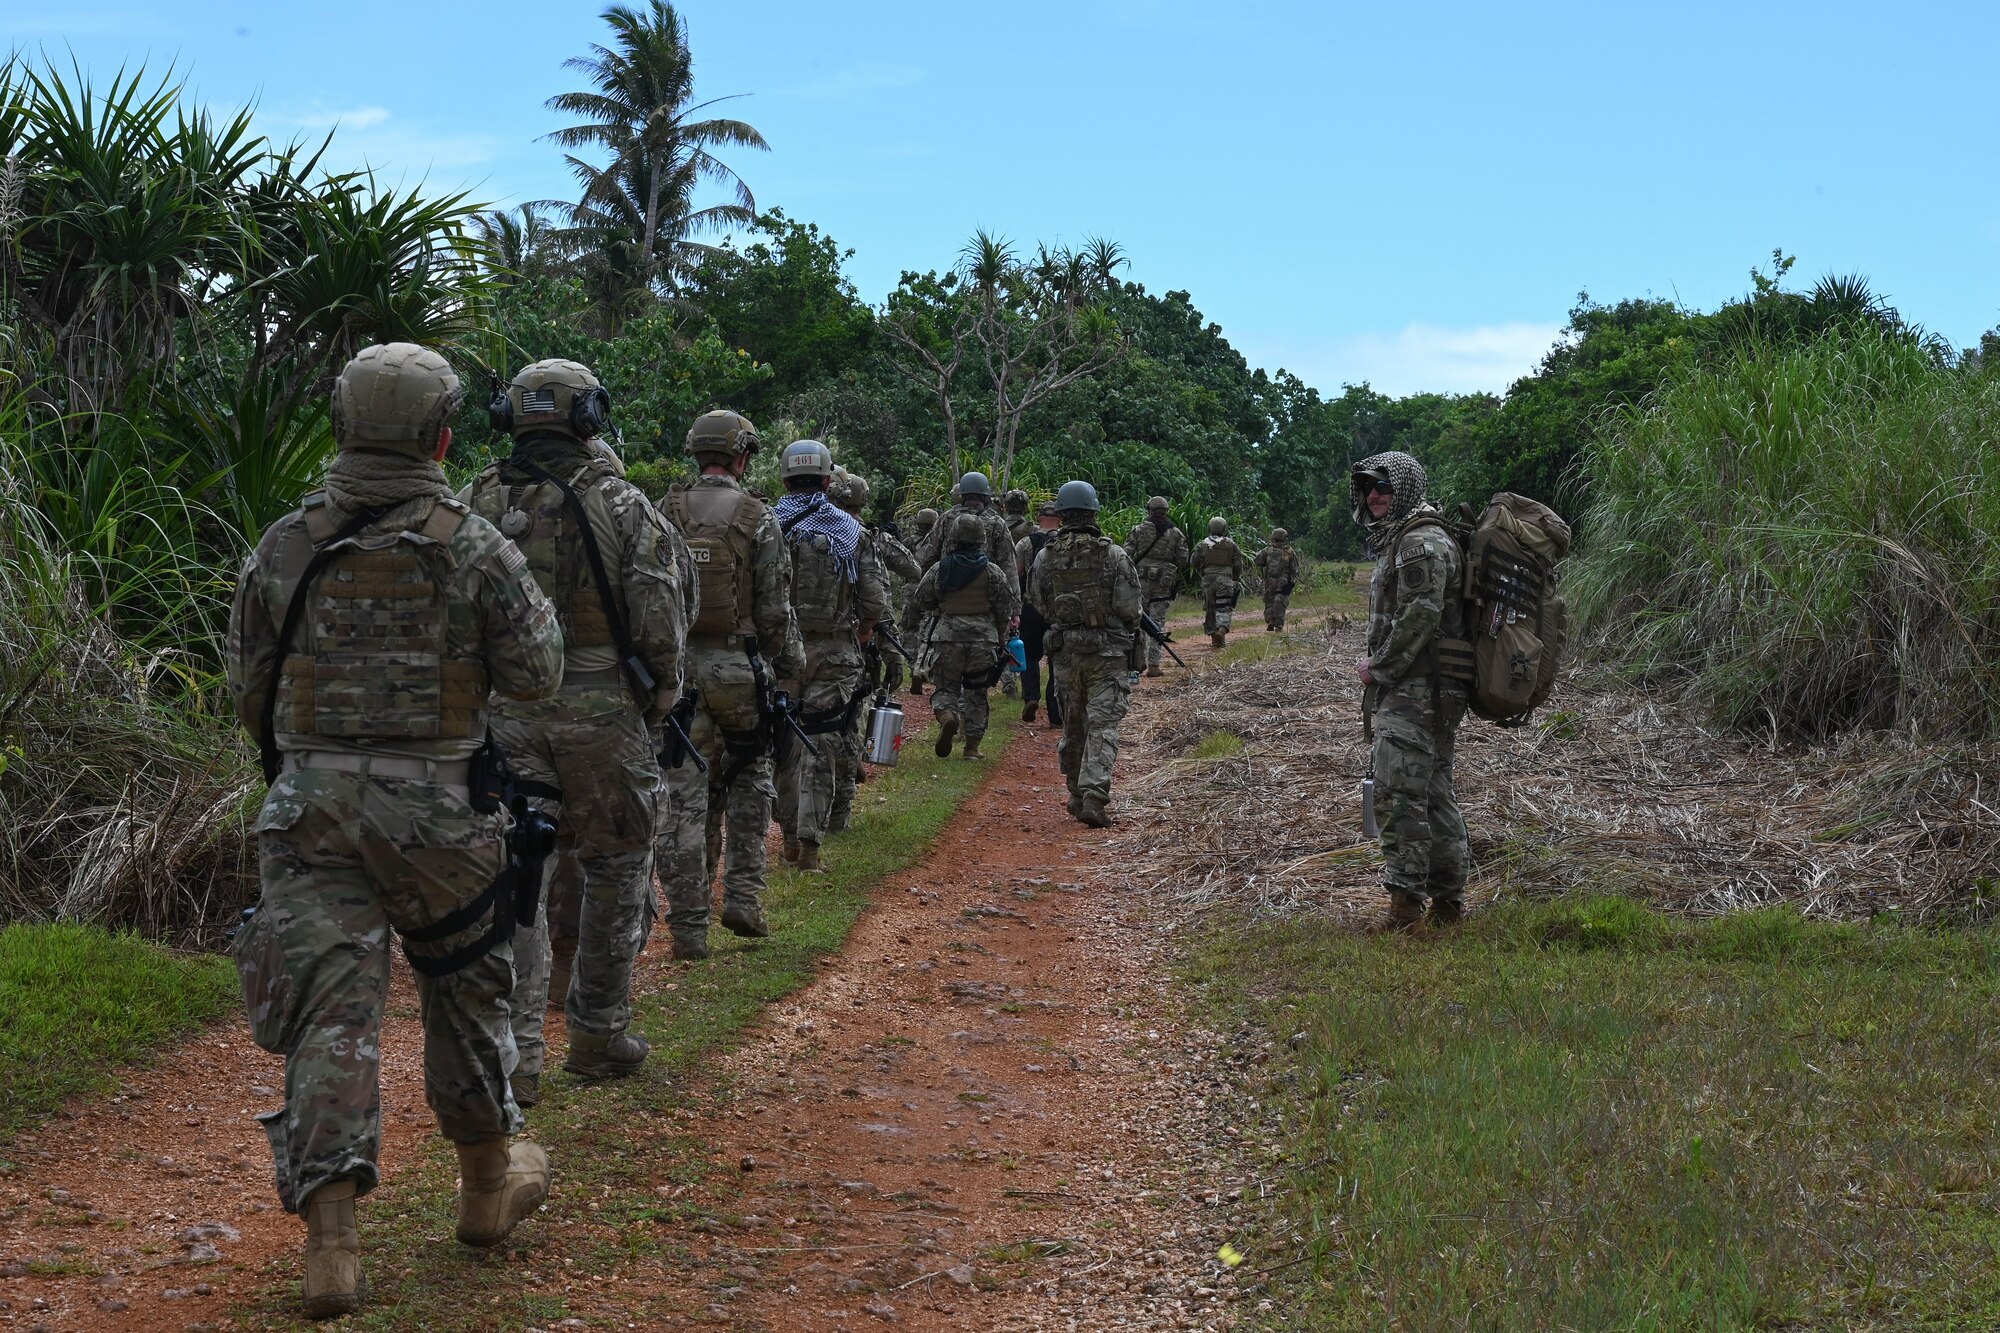 U.S. Air Force members assigned to
Andersen Air Force Base, Guam, receive
a briefing on a scenario
before conducting a training exercise
during the air advisor course at Pacific
Regional Training Center-Andersen,
Guam, March 31, 2023.